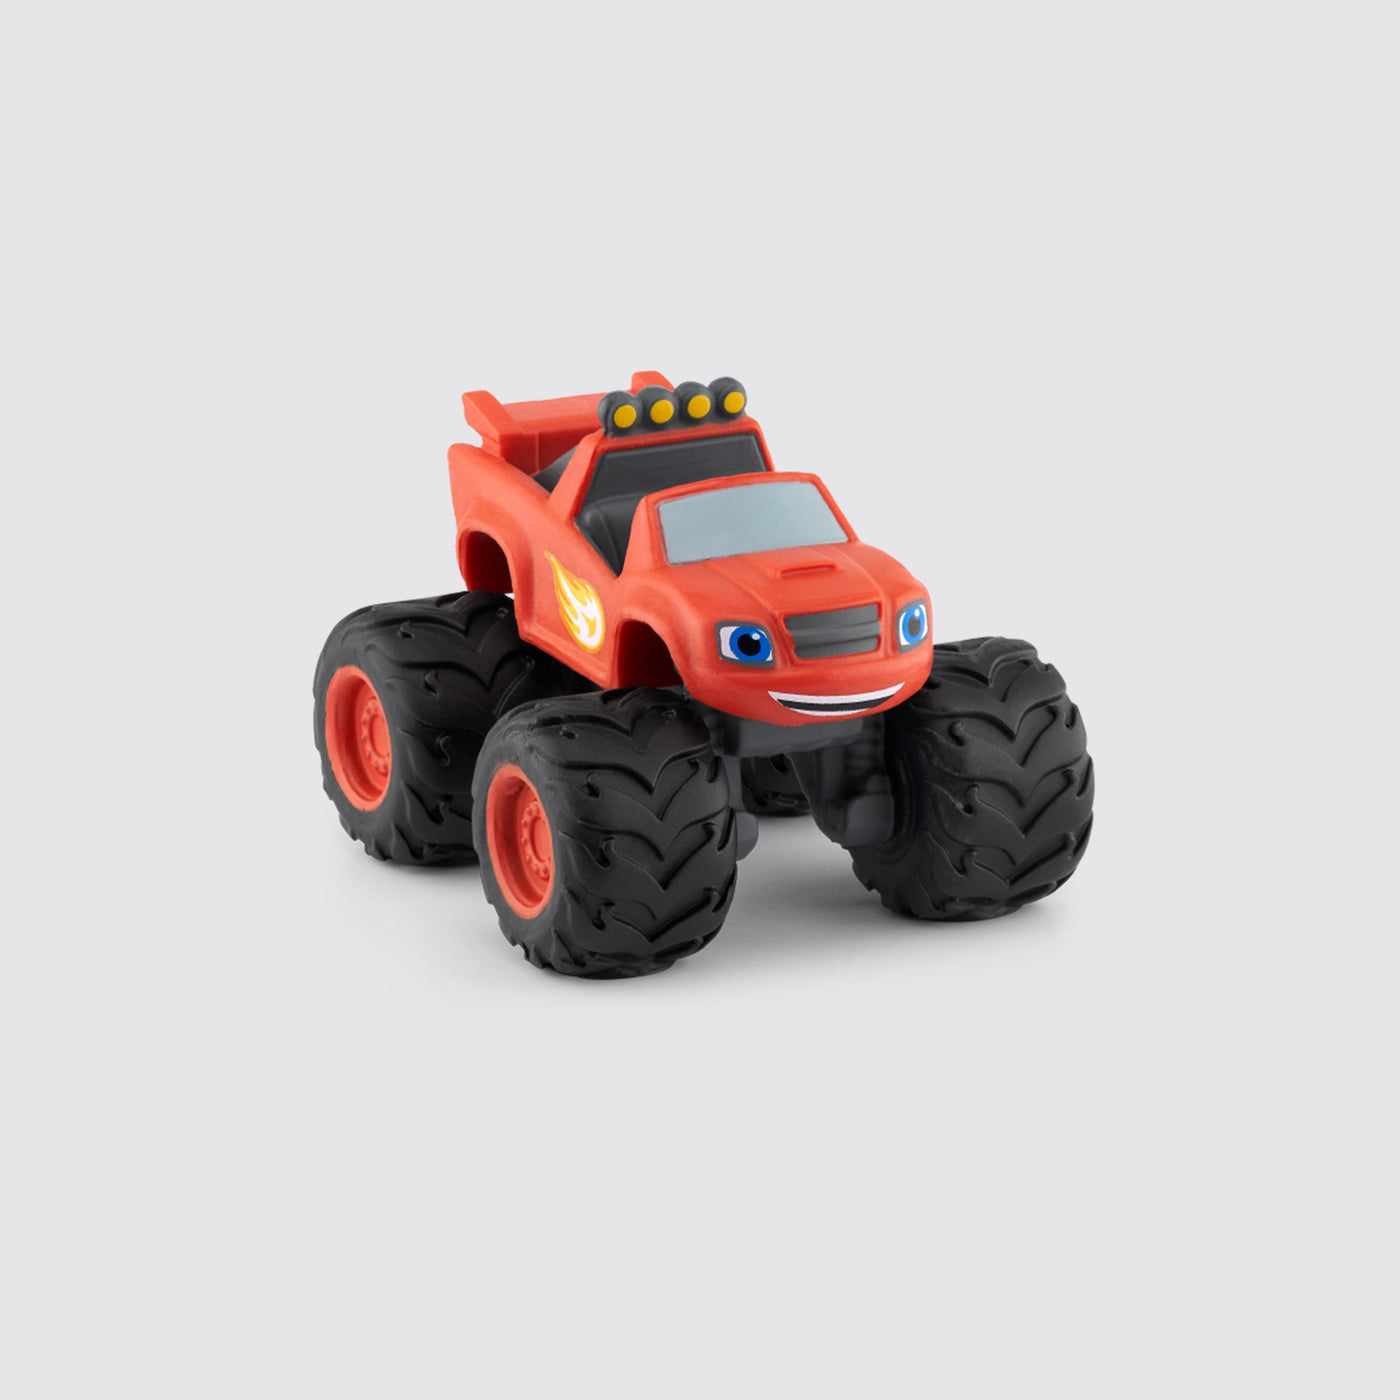 Tonies Disney Audio Play Character: Blaze and the Monster Machines